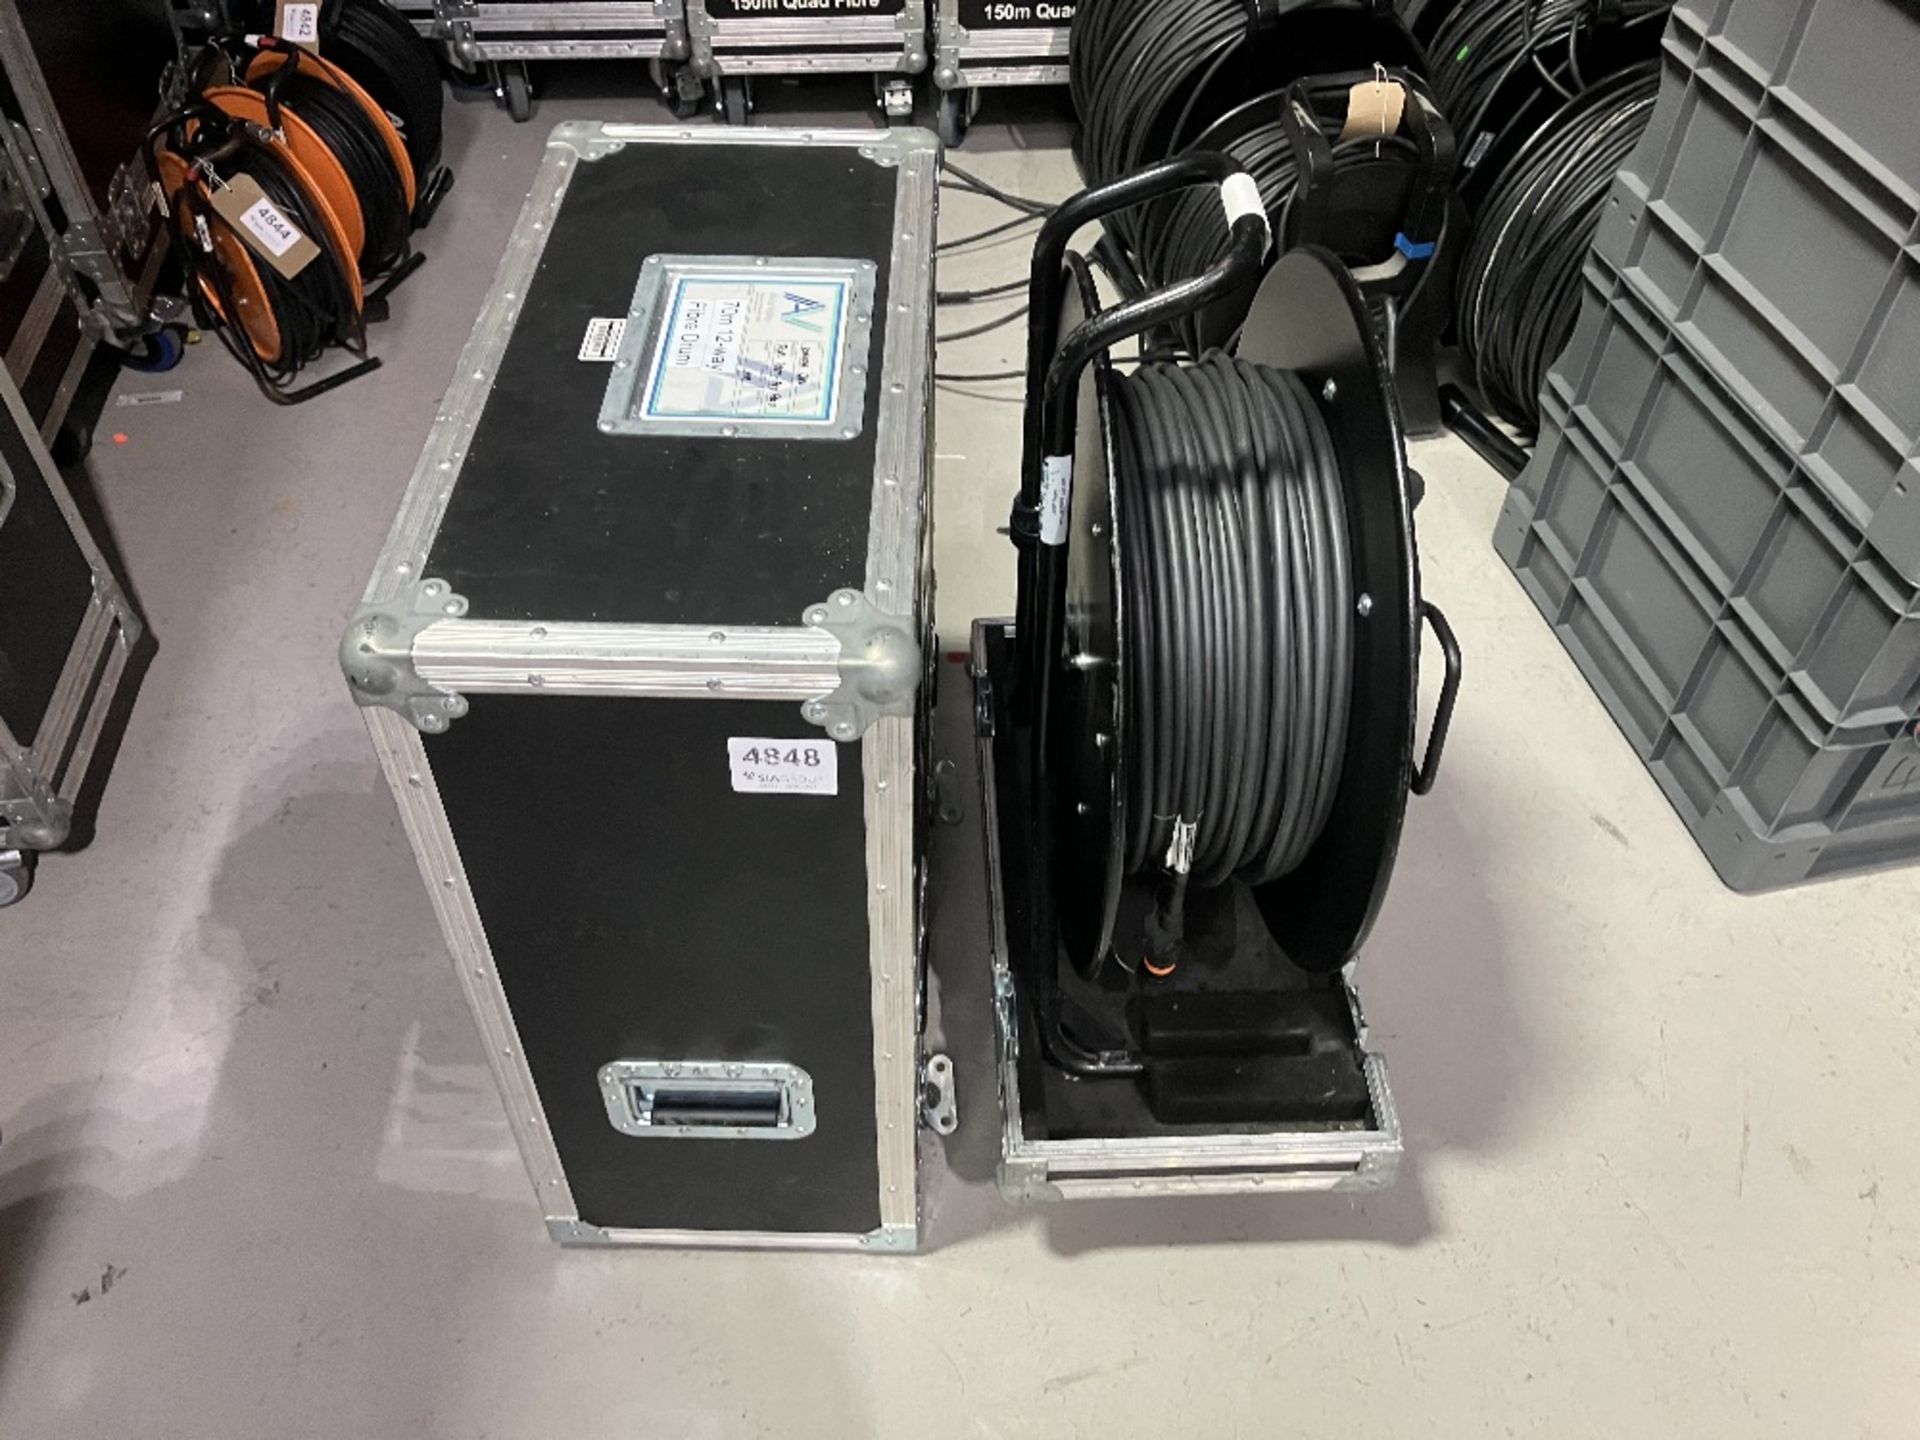 70m 12-way Fibre Cable Reel With Heavy Duty Mobile Flight Case - Image 2 of 7